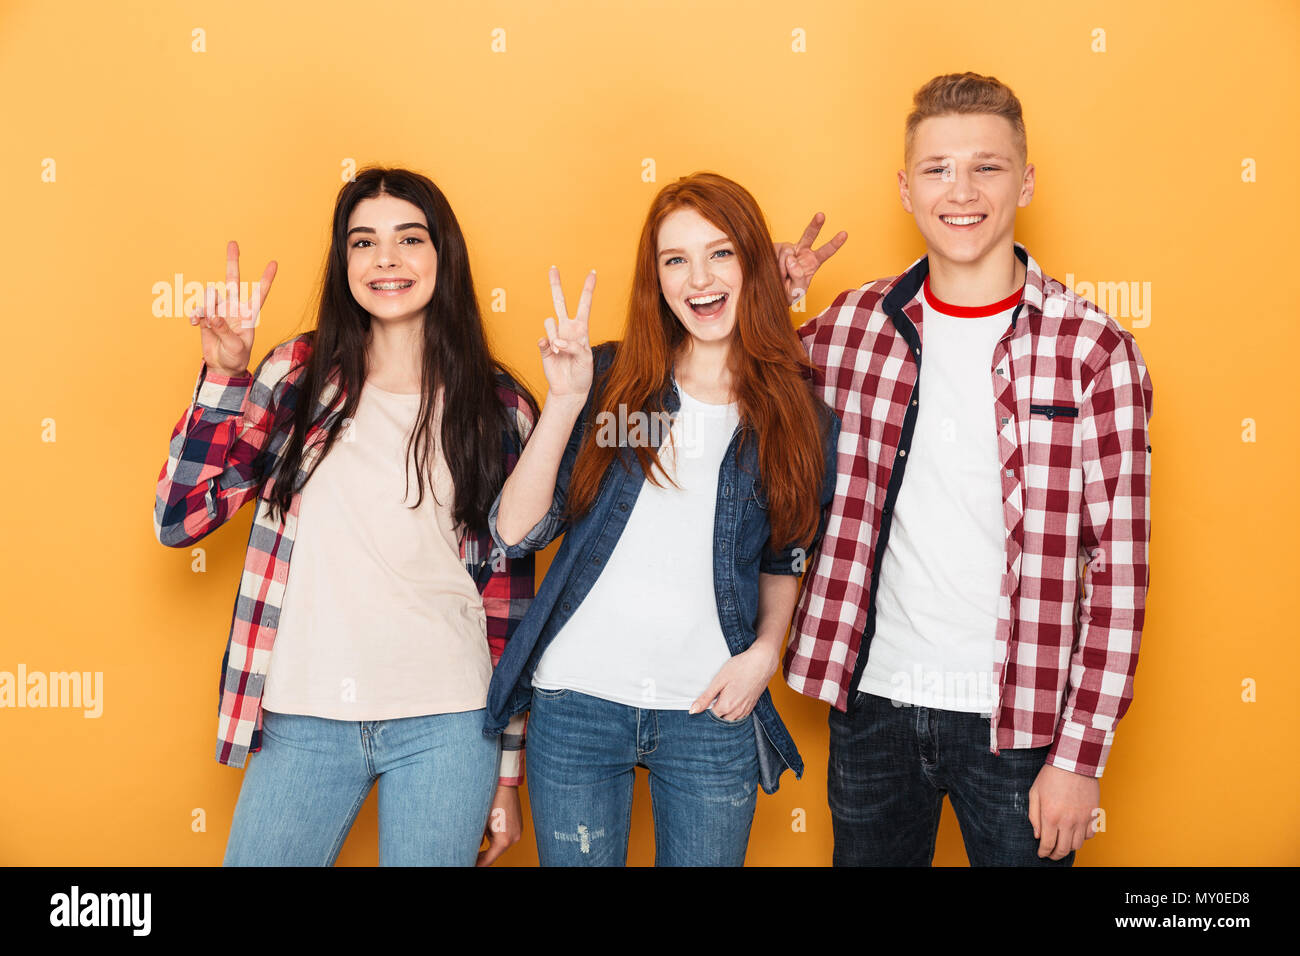 Group of happy school friends showing peace gesture while standing together over yellow background Stock Photo